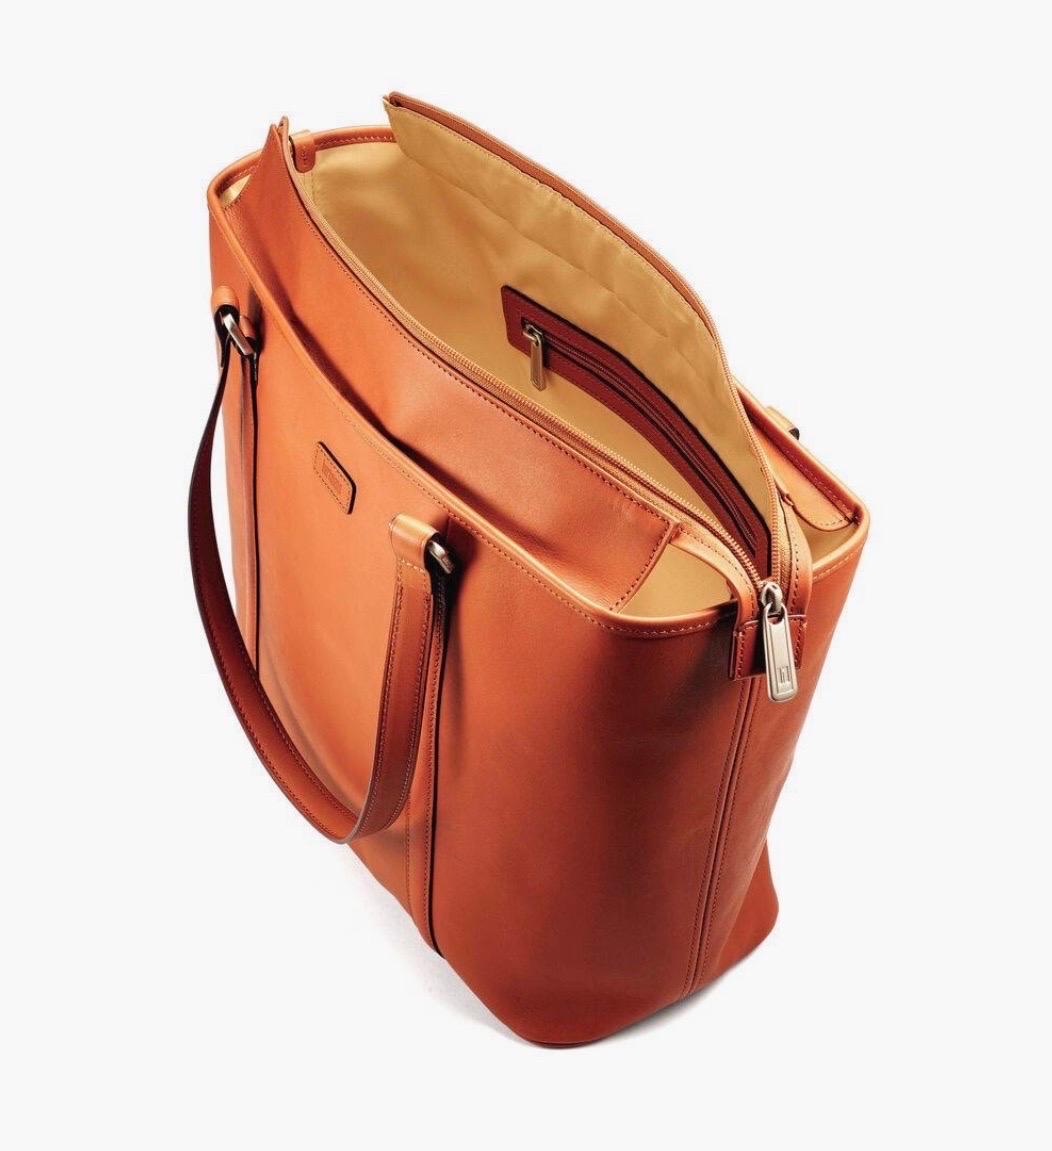 
Brand new with dust bag , great for gift 
From the vaults of the Hartmann archive comes this collection of classic leather goods. Finely finished full grain leather is enhanced with satin finished hardware. Business organization and technology